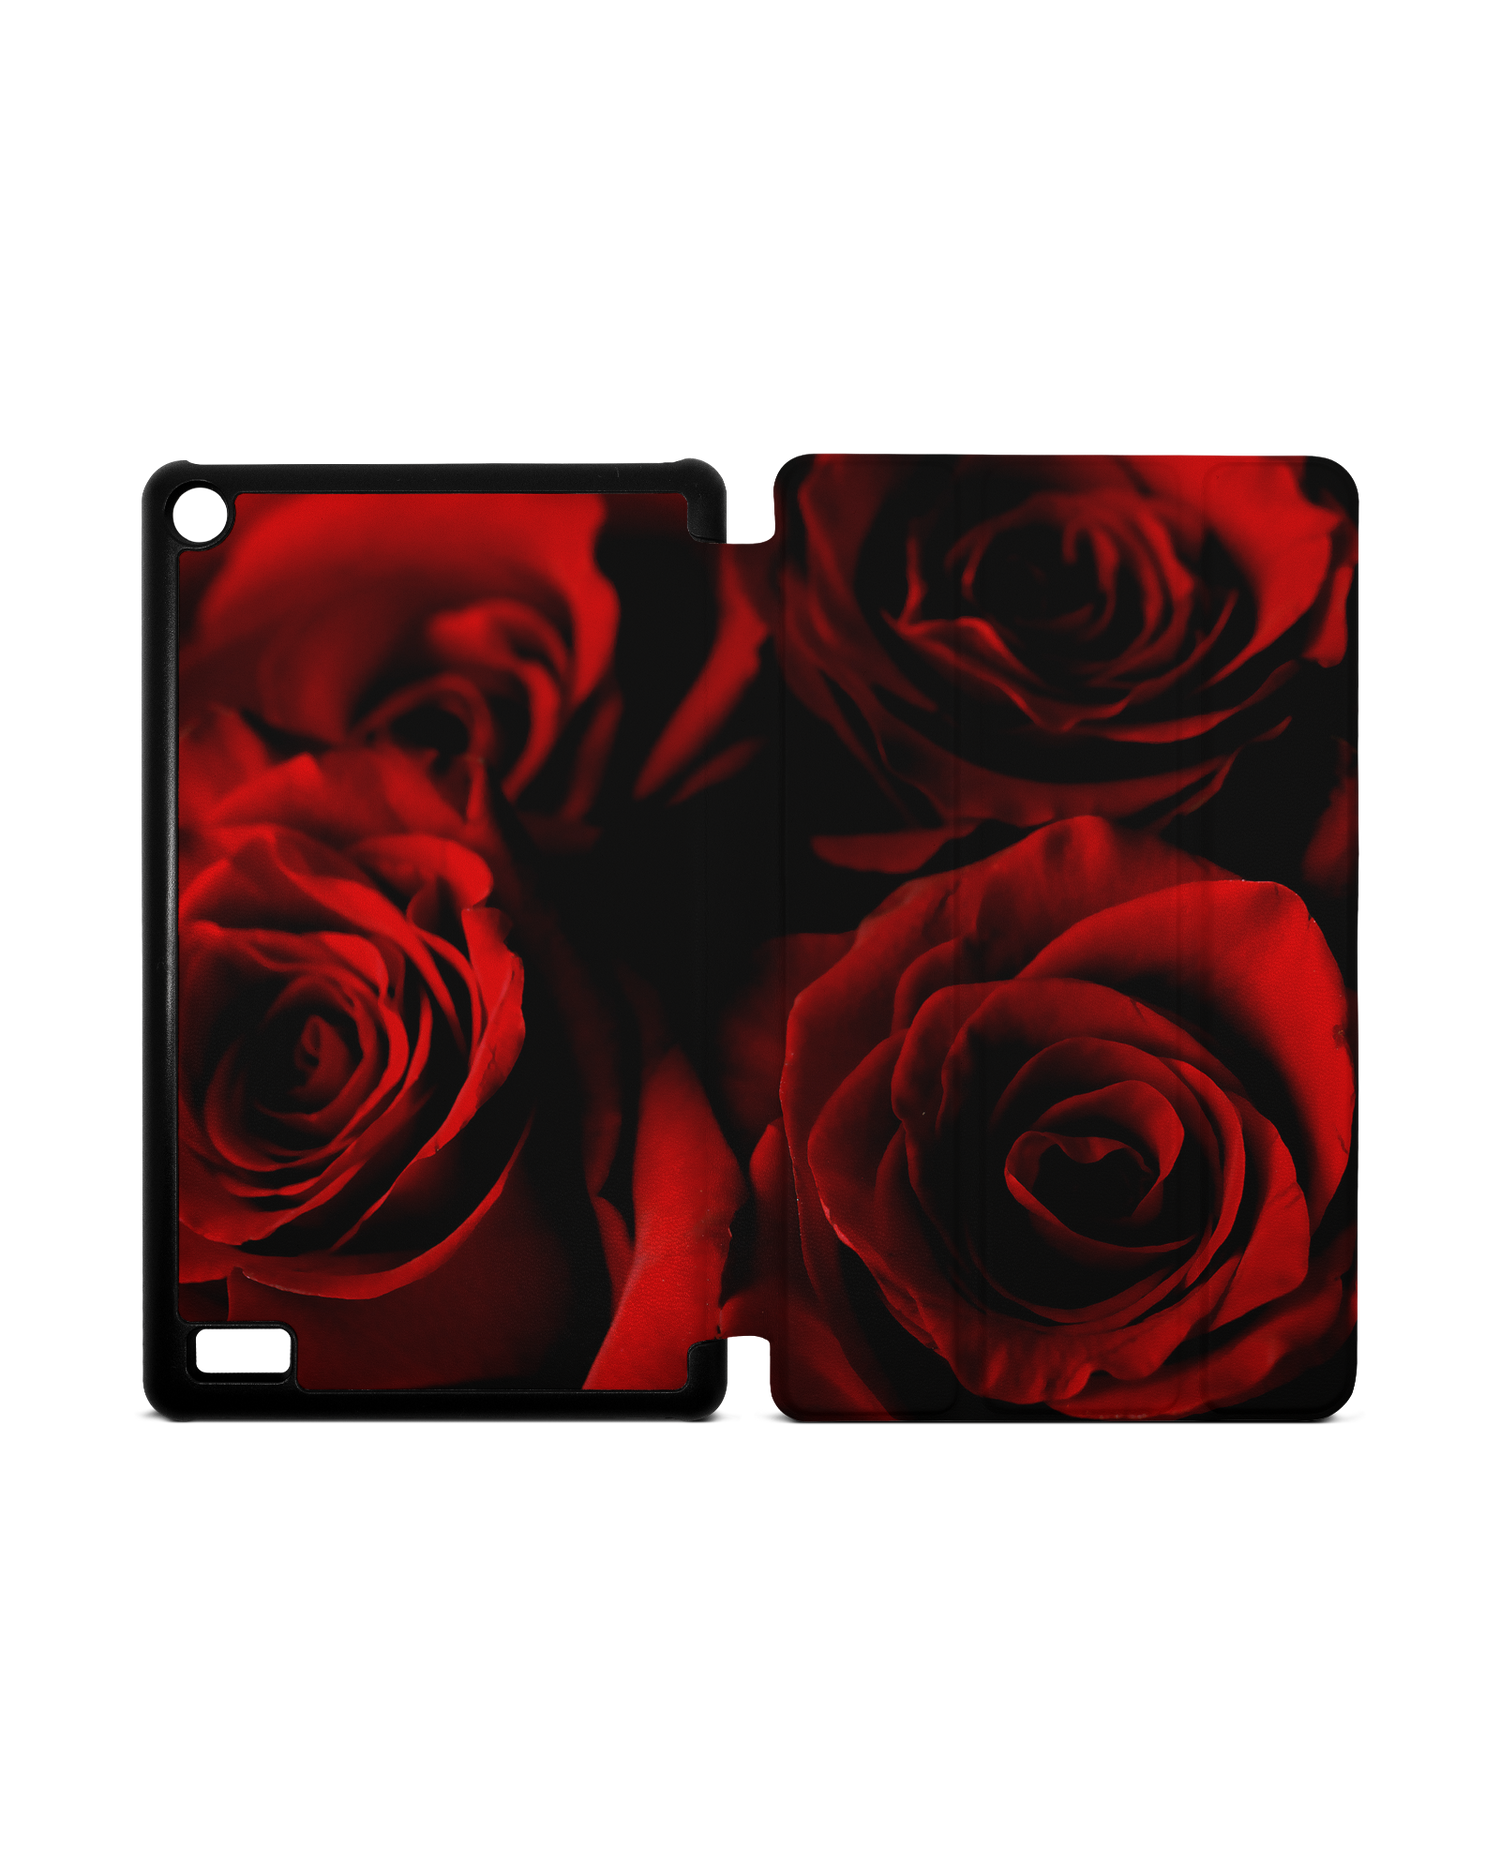 Red Roses Tablet Smart Case for Amazon Fire 7: Opened